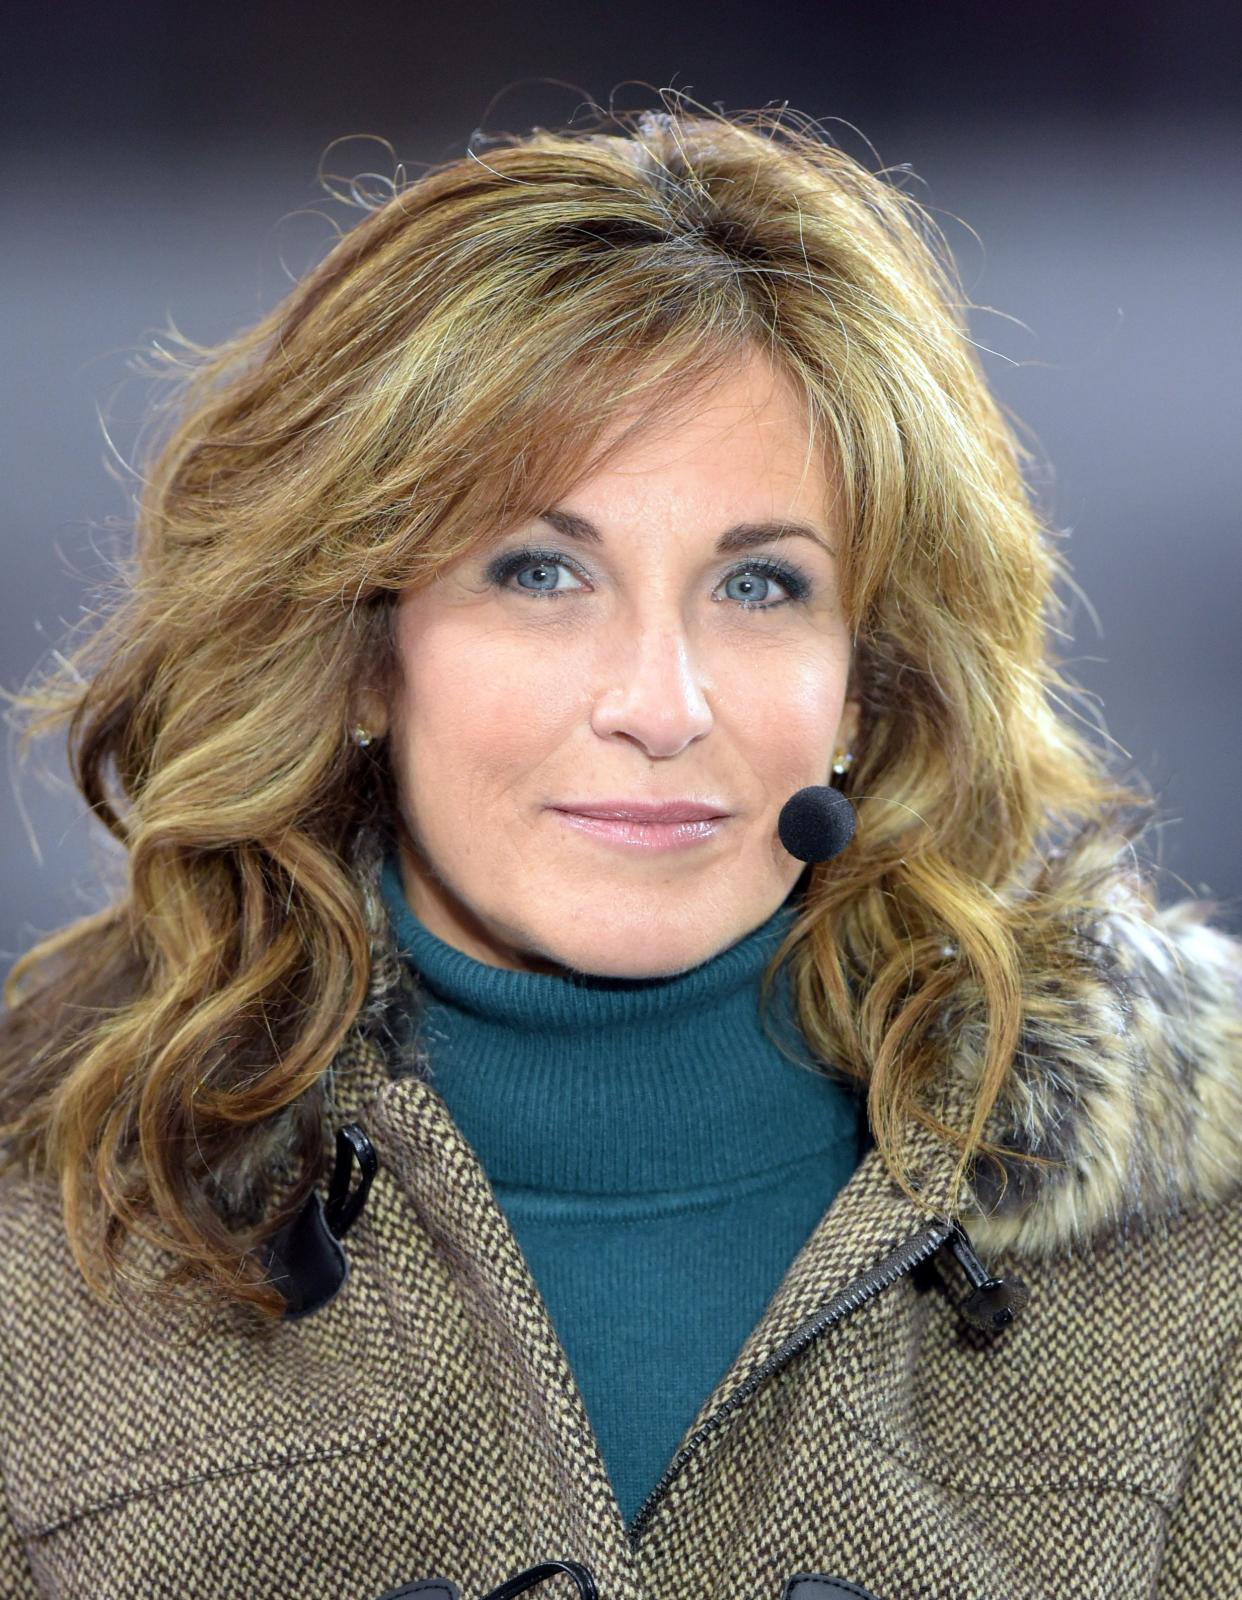 Suzy Kolber took over "Monday Night Countdown" hosting duties from Stuart Scott in 2014. She wrote on Twitter that she is among ESPN employees who are being laid off.